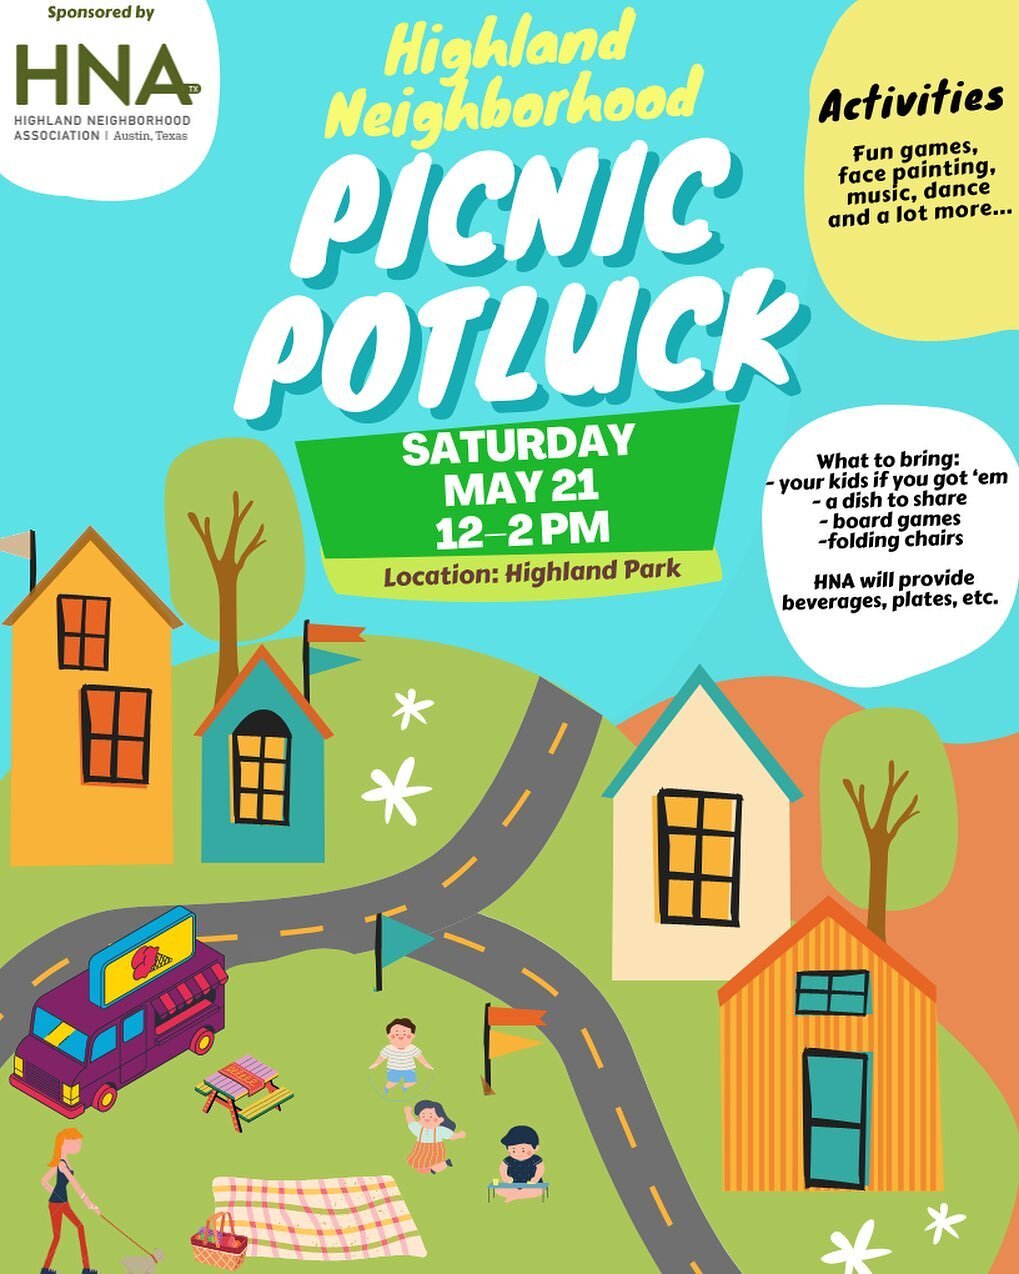 Join us May 21st at noon for our neighborhood picnic potluck! 🍕🥤🍔🍓🍌🌮